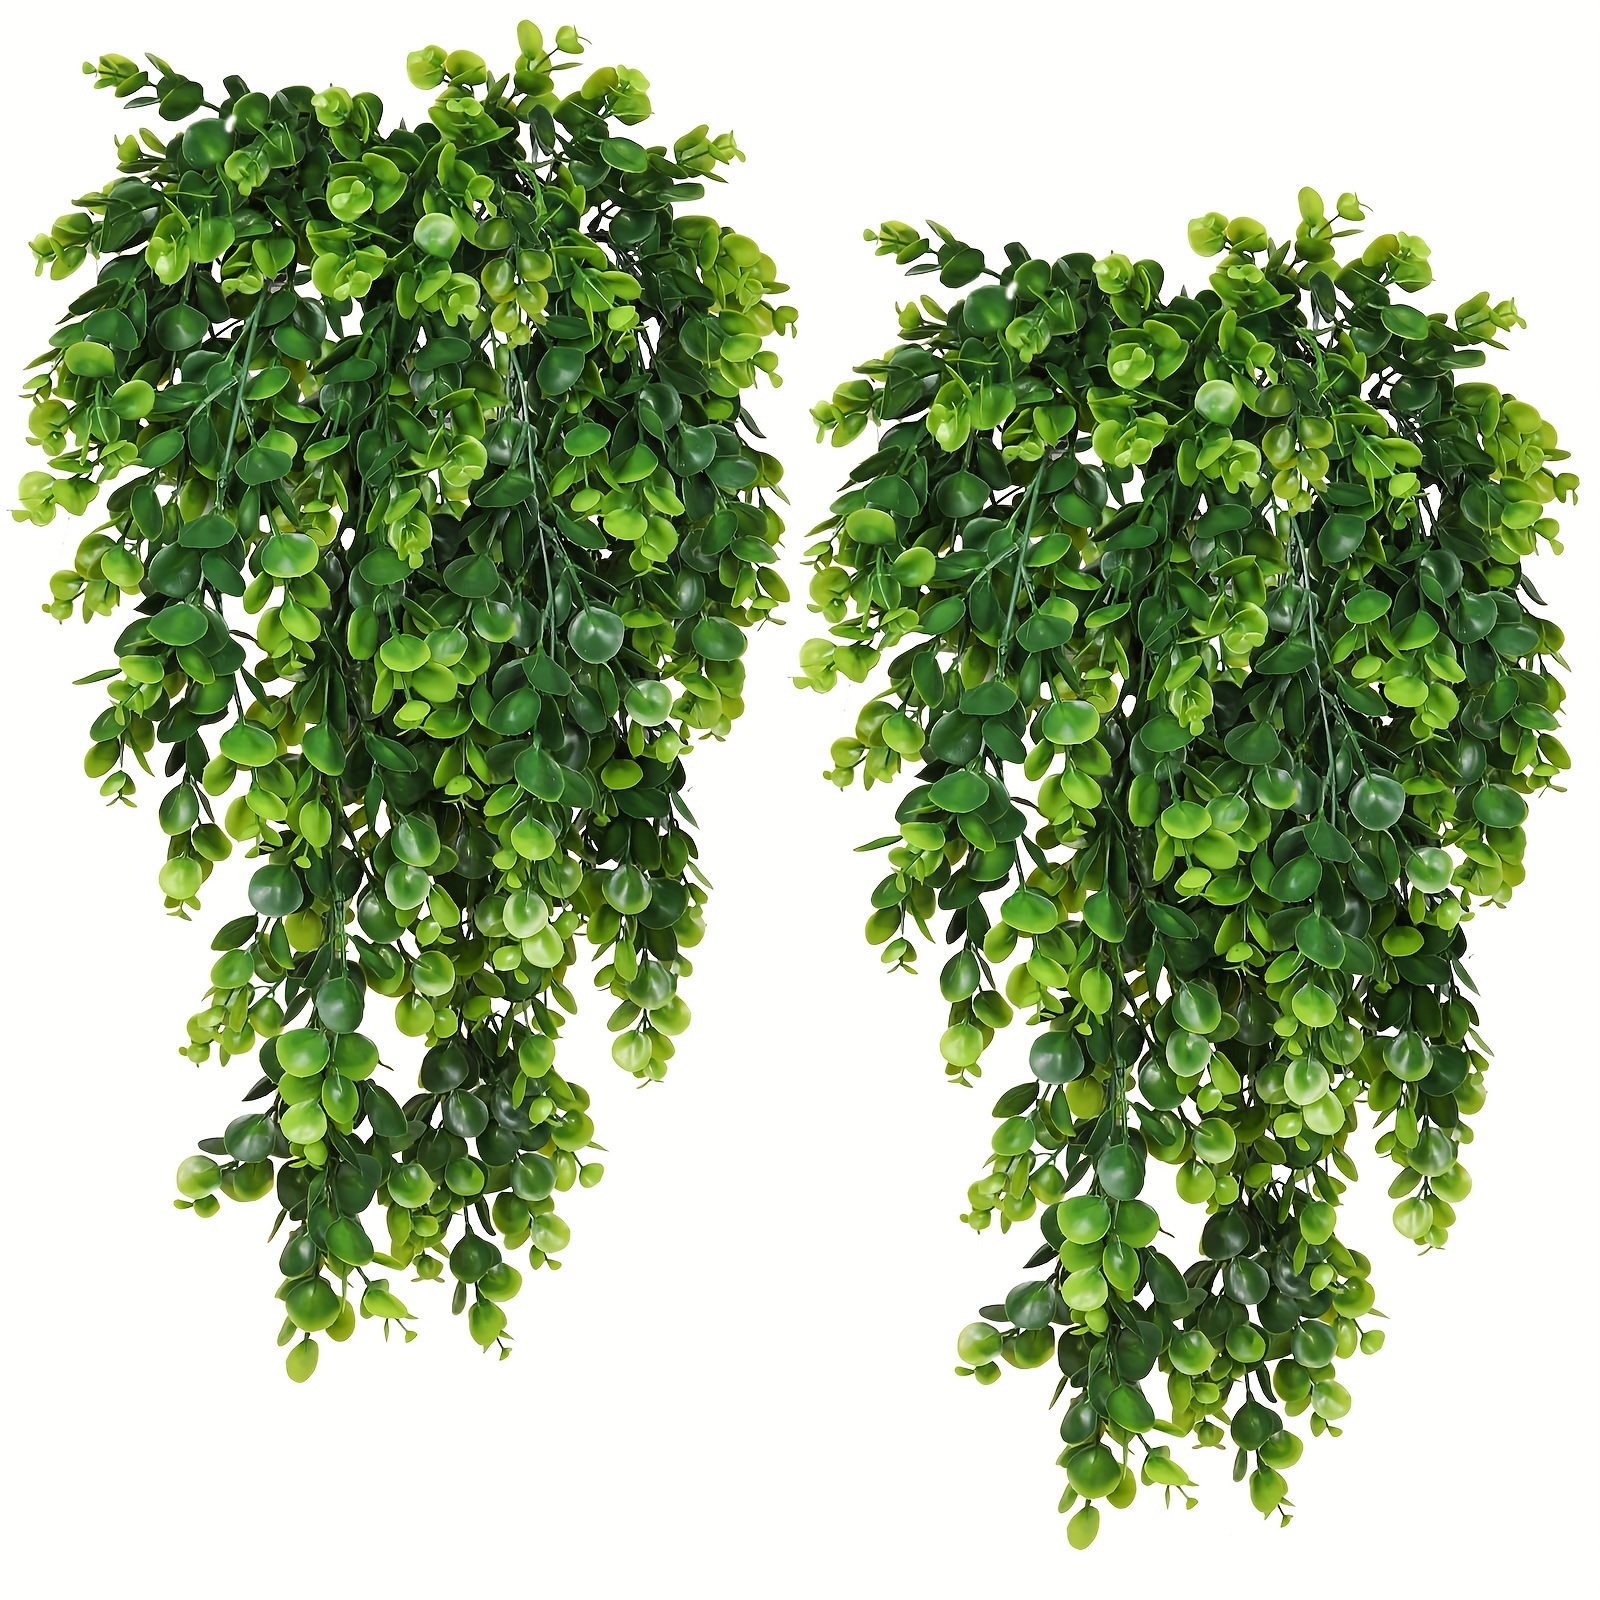 

2/4/6/8pcs Artificial Hanging Plants, Fake Ivy Vine With Fake Leaves, Suitable For Room Hotel Living Room Decoration, Indoor Outdoor Decoration Yard Greenery House Wall Decor